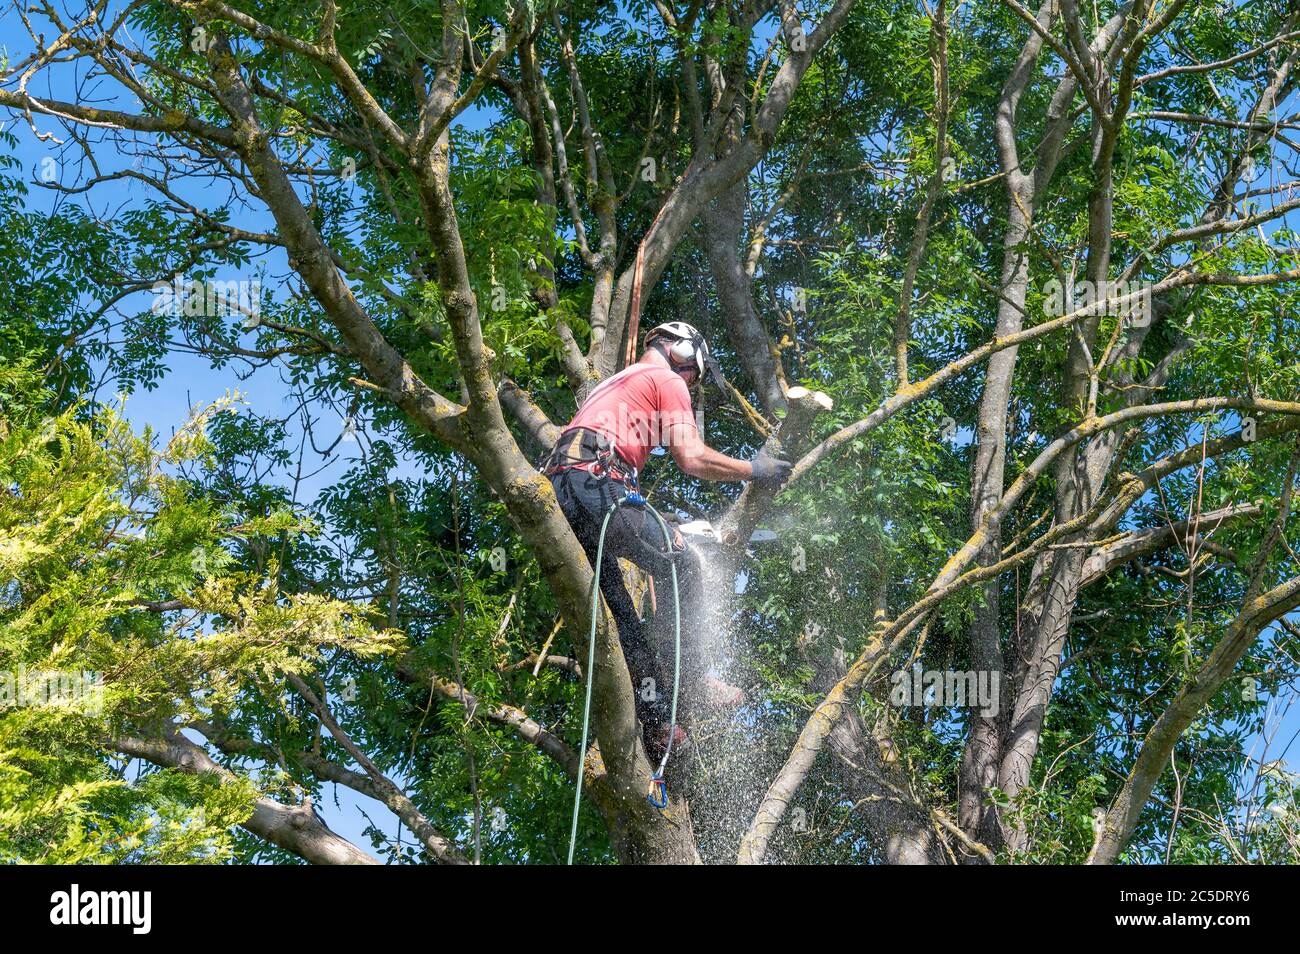 A Tree Surgeon or Arborist using a chainsaw to cut off tree branches. Stock Photo